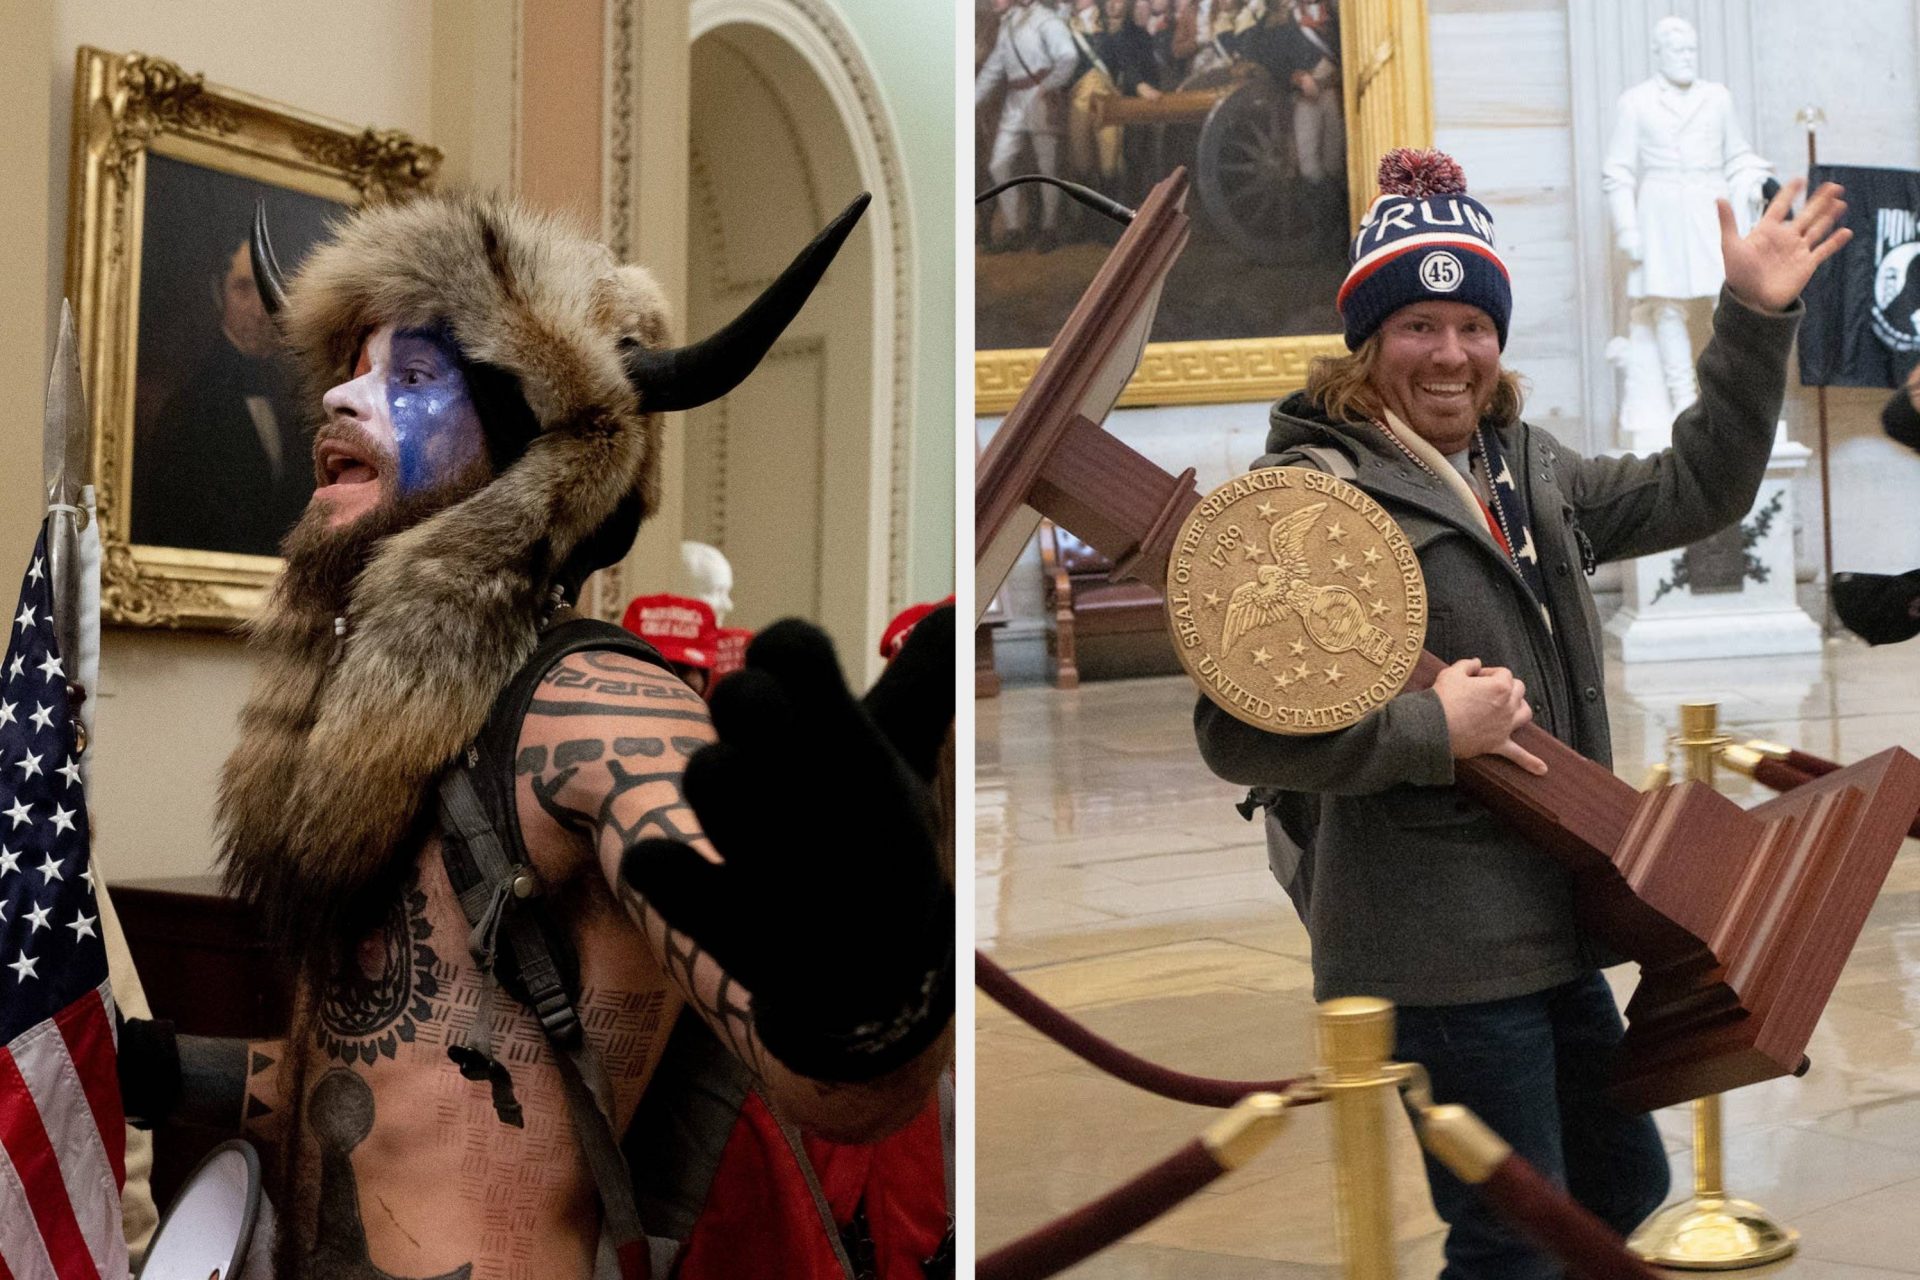 The Shirtless Horned Man Who Became Photographed Storming The Capitol Has Been Charged